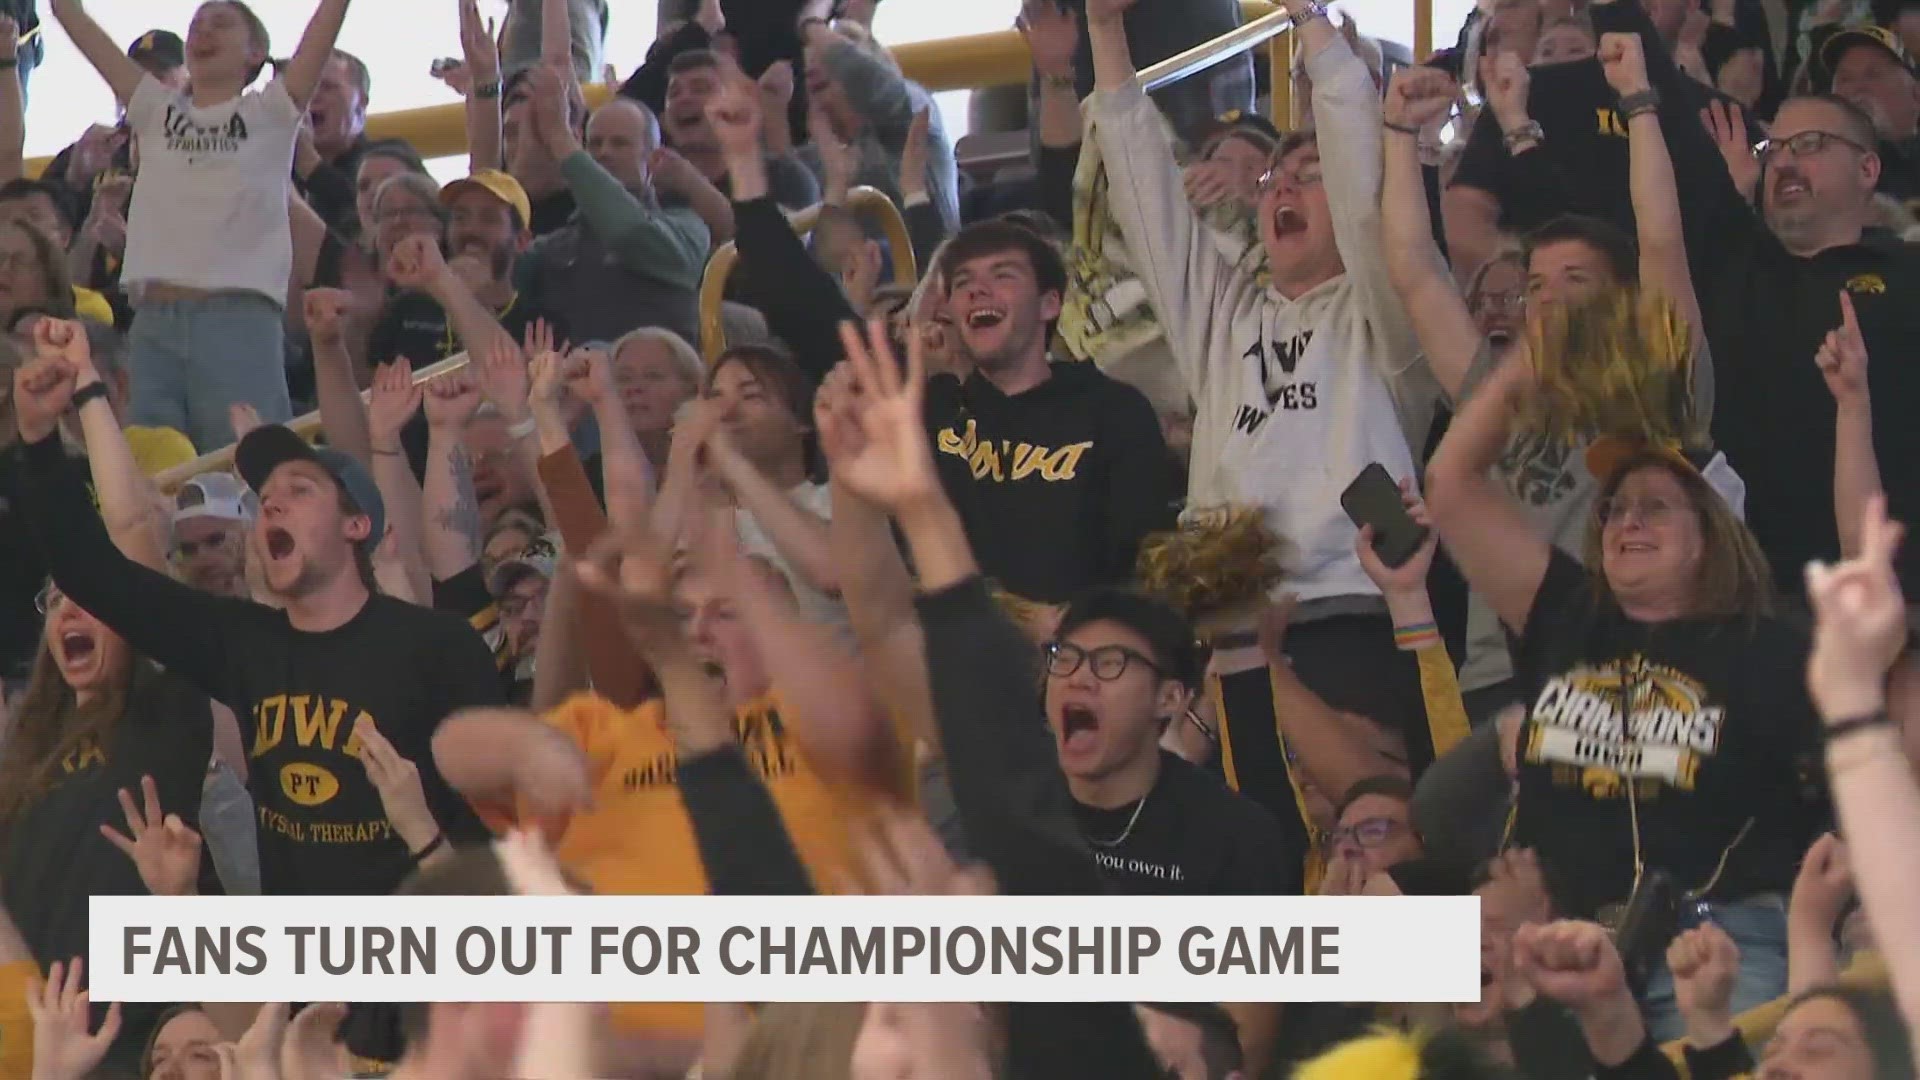 Local 5 traveled to Iowa City to join a watch party at Carver Hawkeye Arena. Here's what fans had to say.